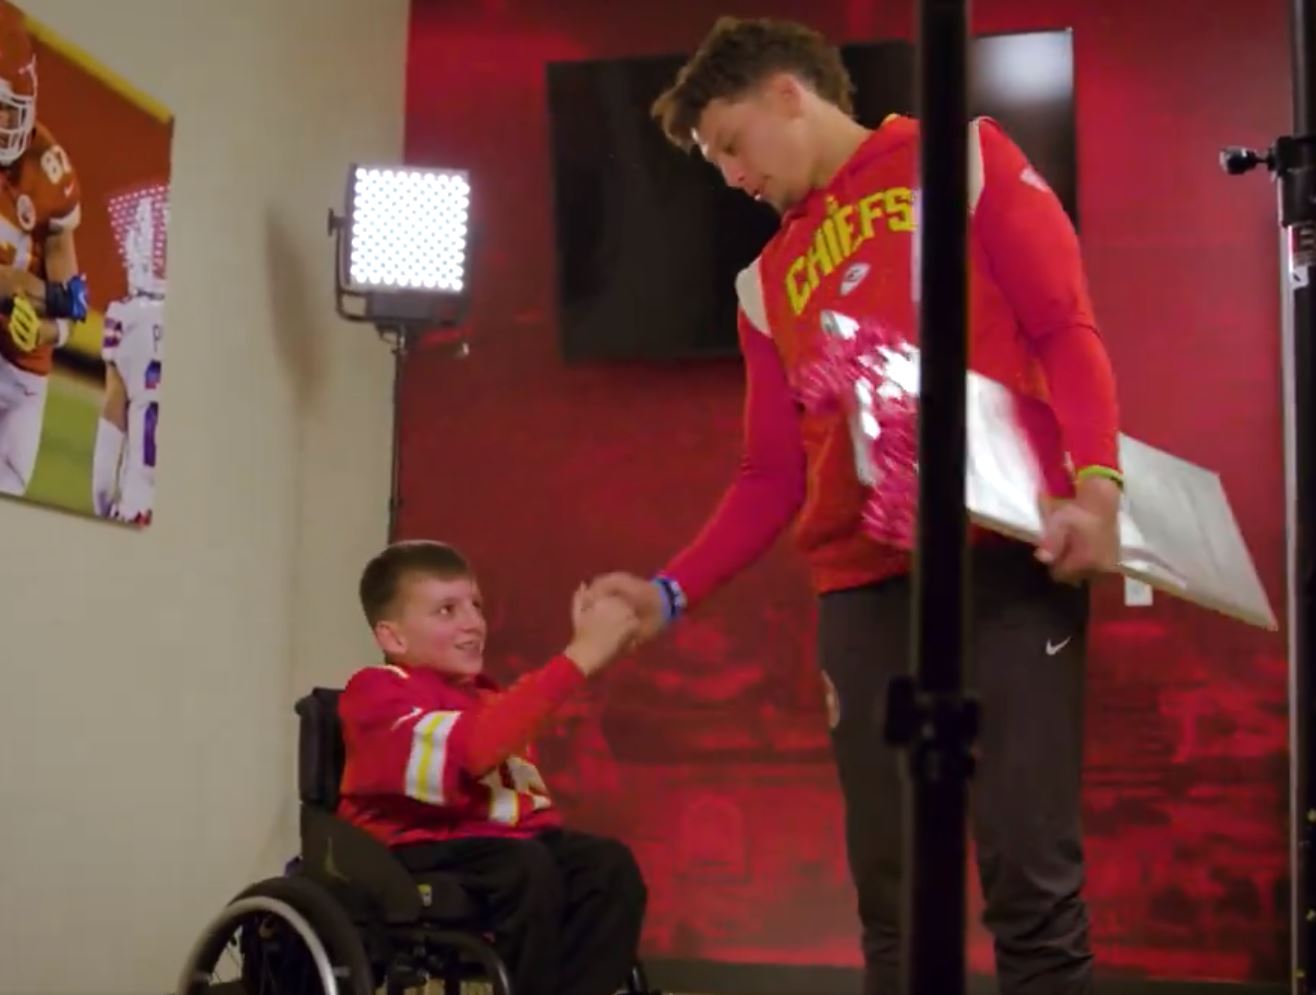 Mahomes gave a young fan tickets to see the Super Bowl